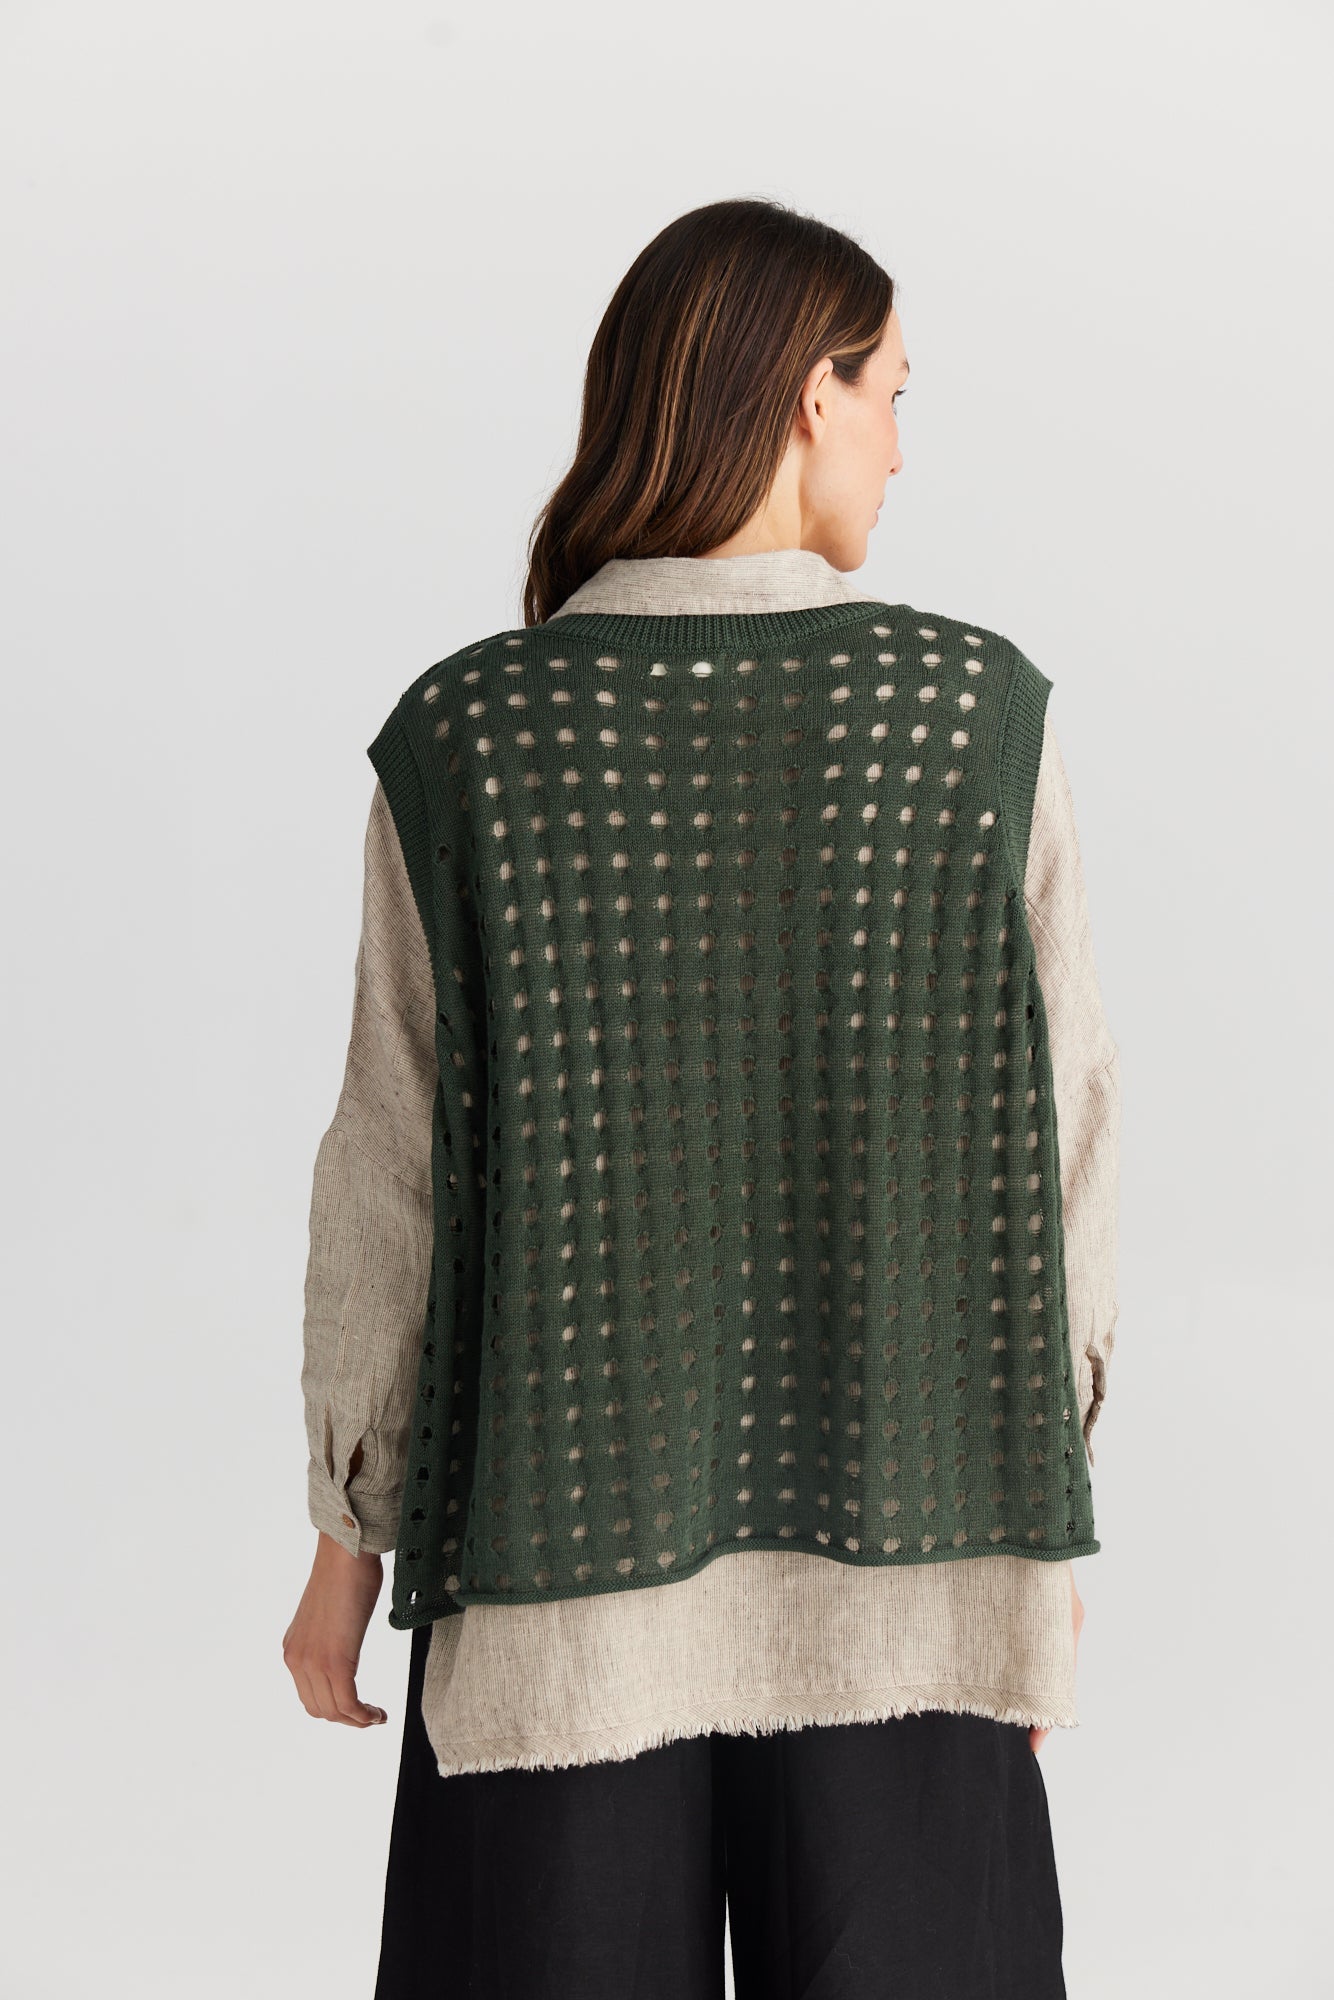 Nola Knit Vest - Forest-Knitwear & Jumpers-The Shanty Corporation-Onesize-The Bay Room